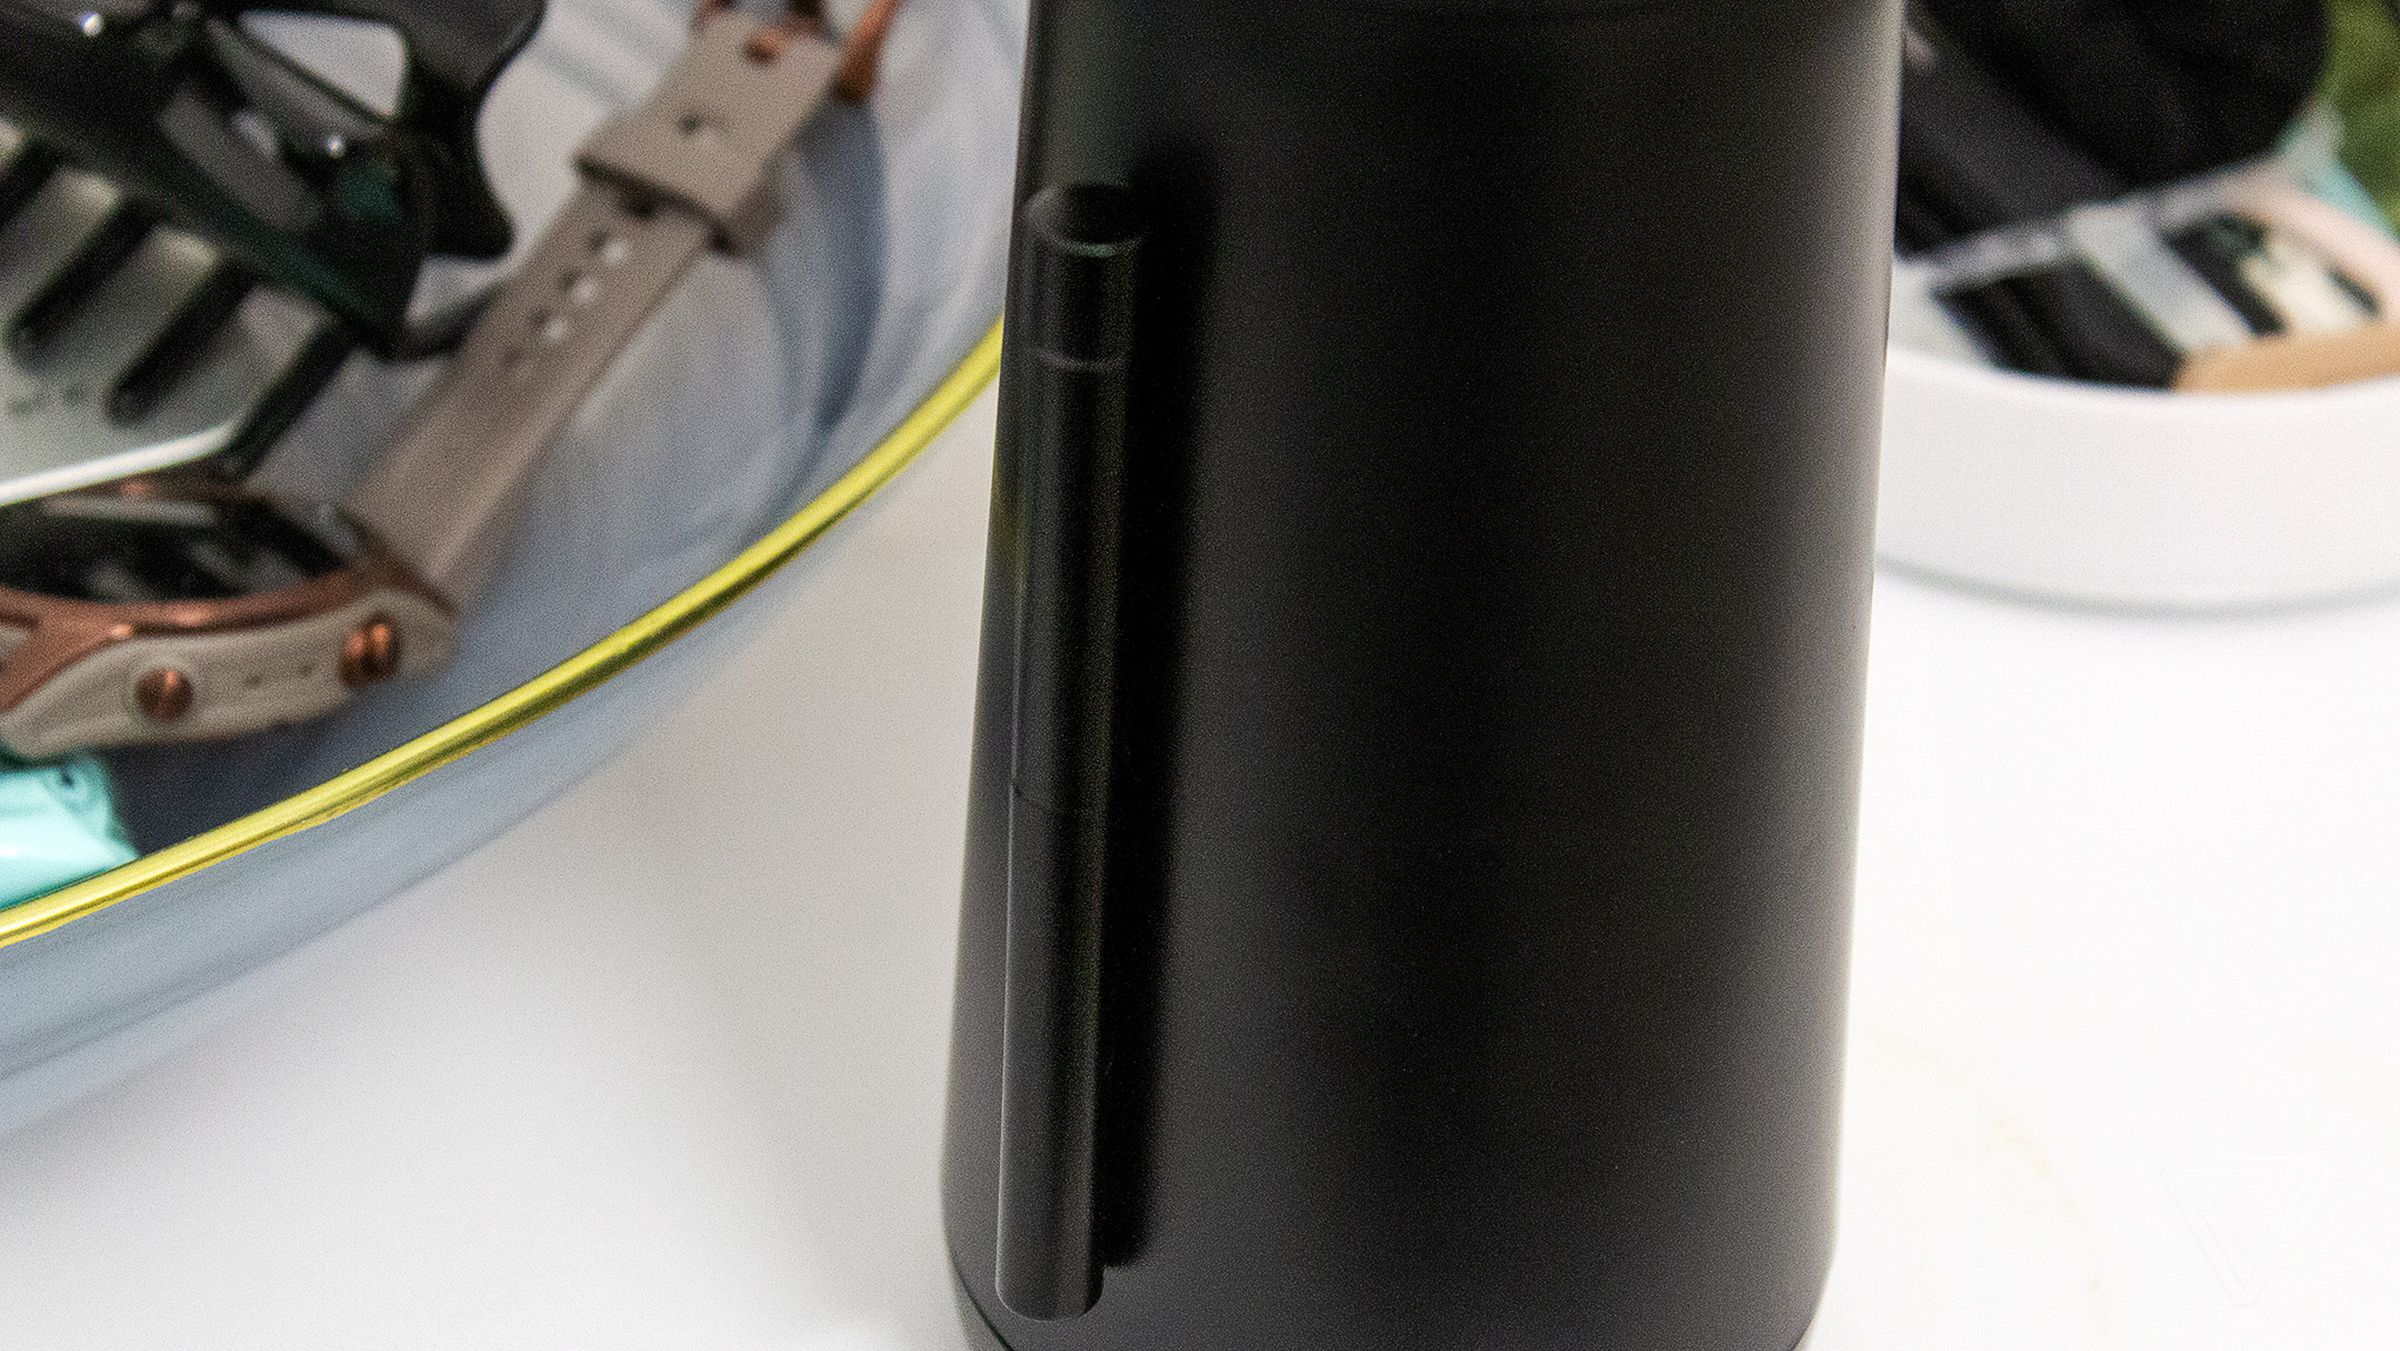 The retractable lip brush attaches magnetically to the back of the device.